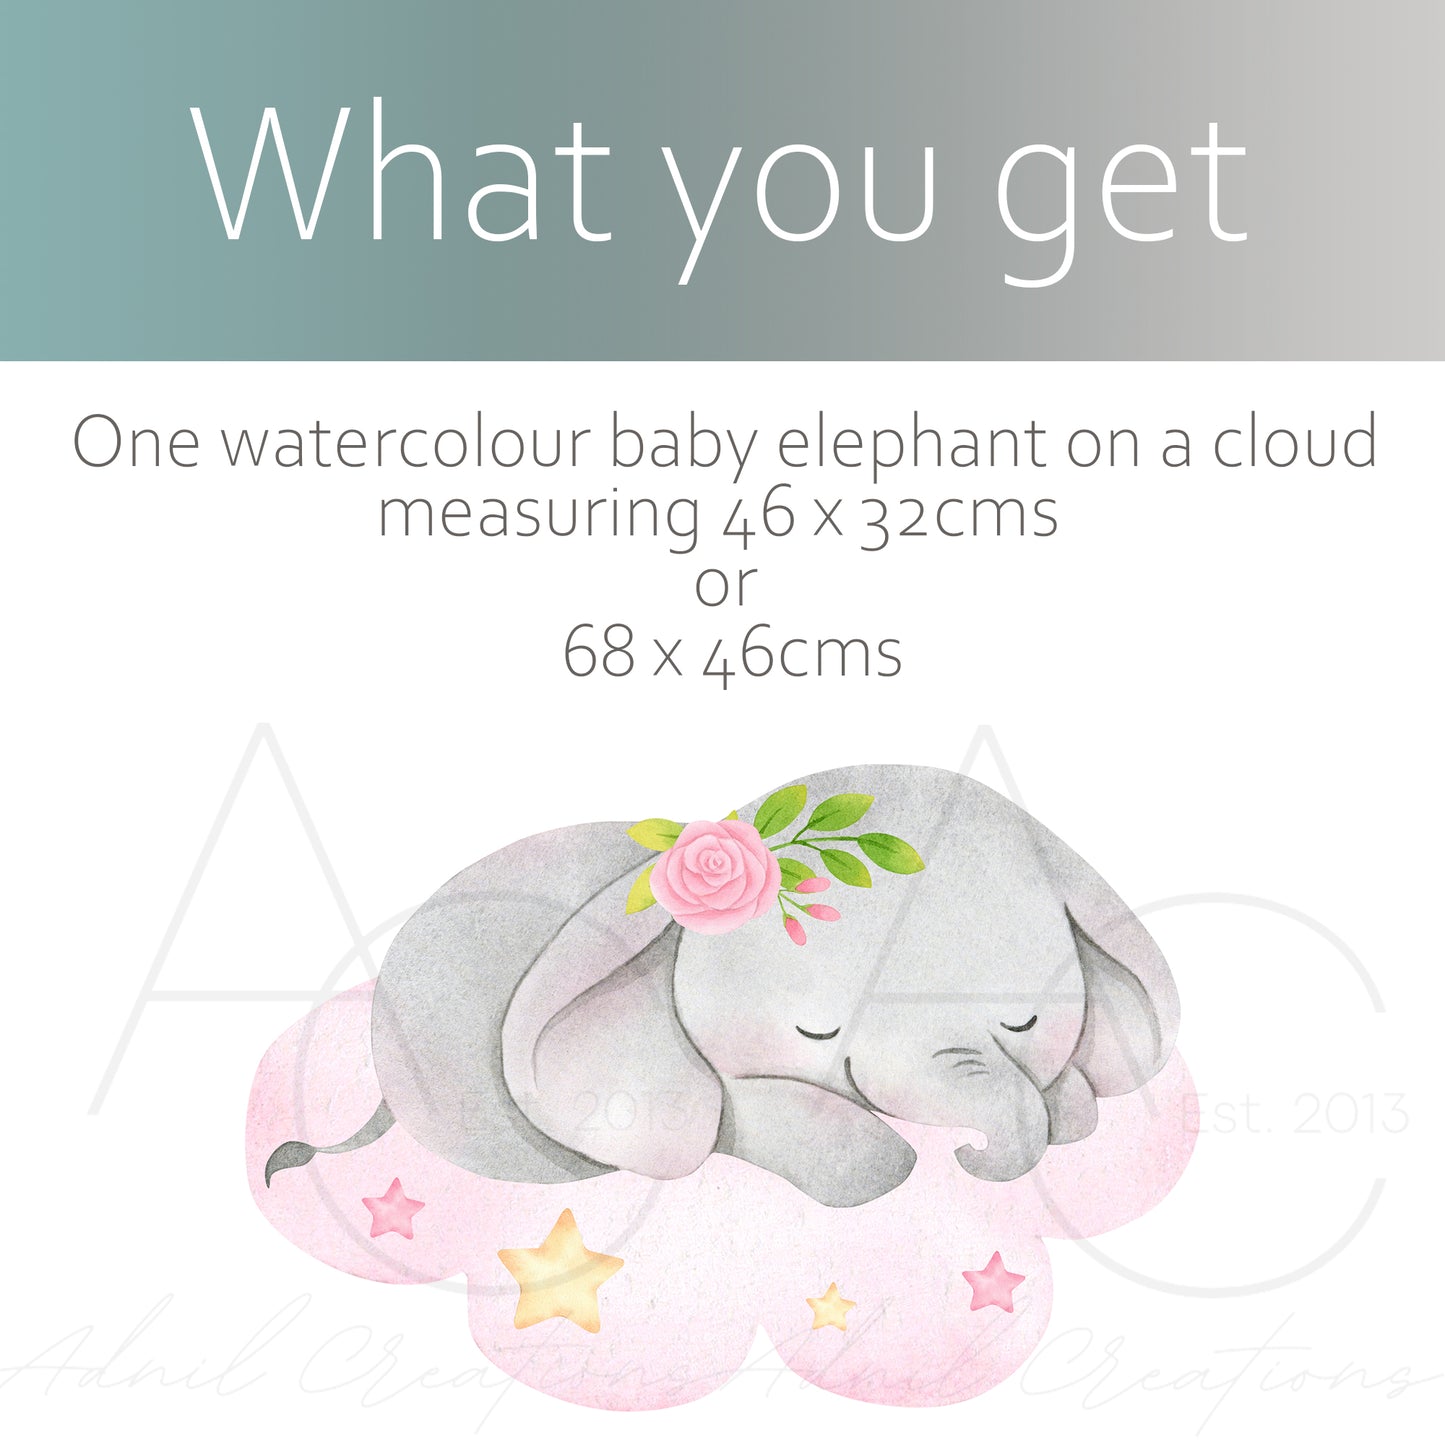 Watercolour baby elephant on a cloud | Fabric wall stickers